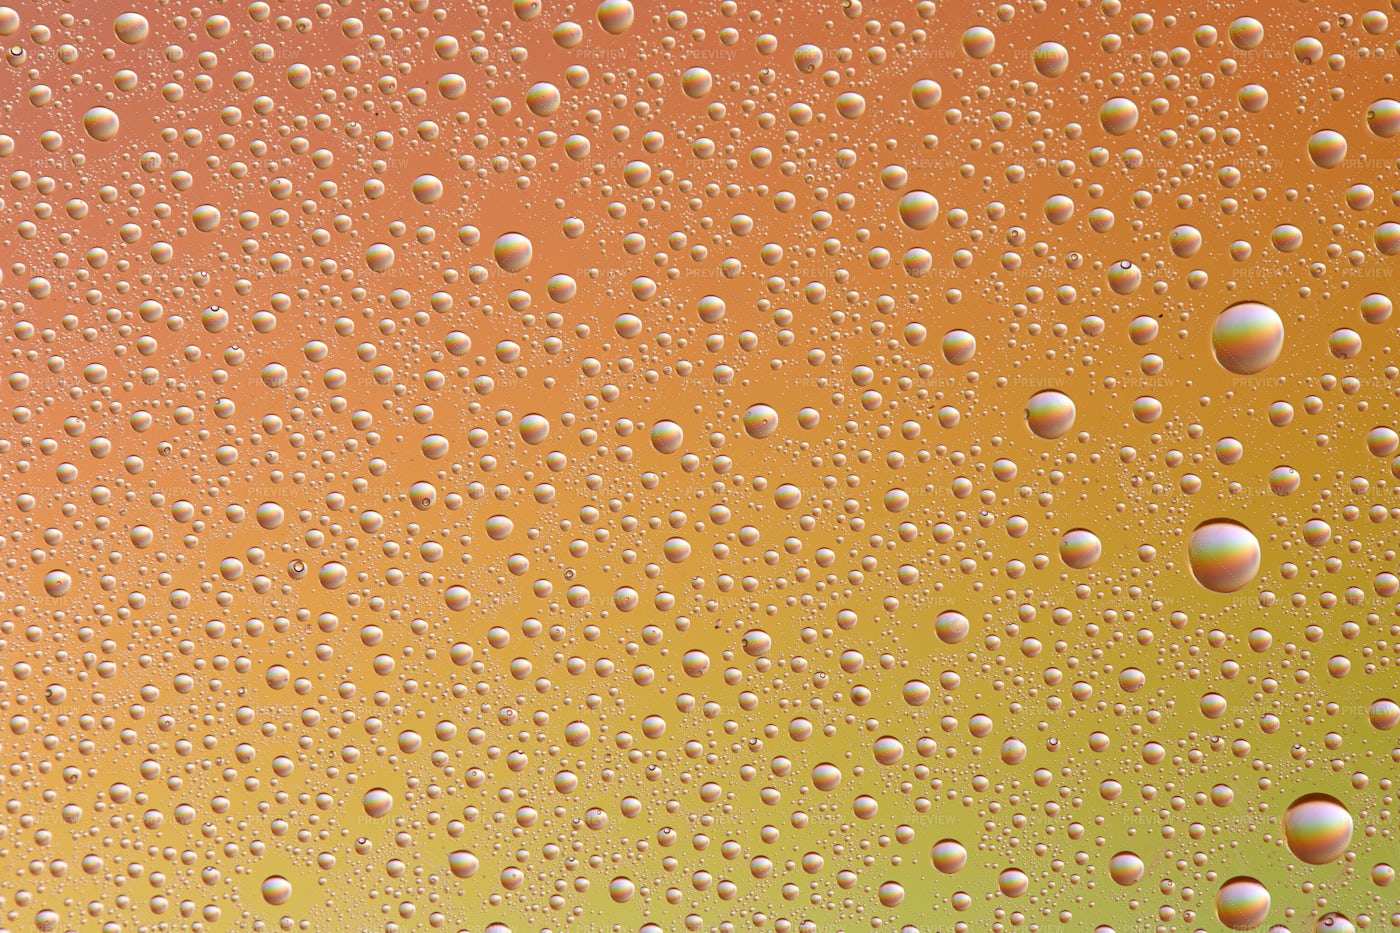 Drops On Glass Of Different Sizes: Stock Photos